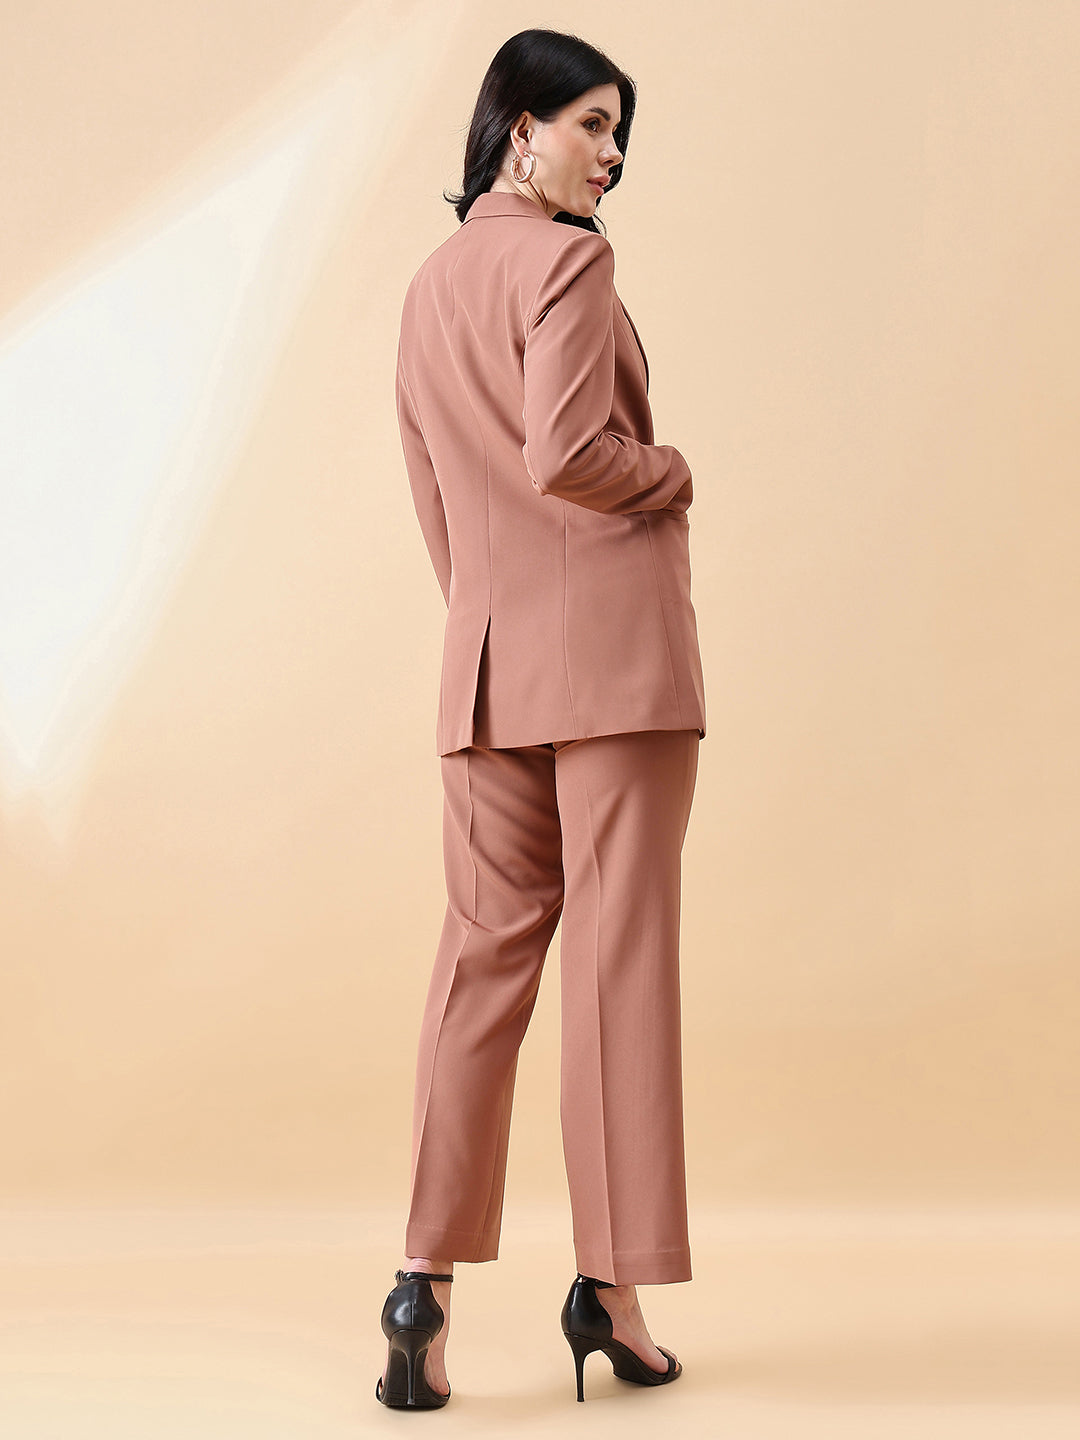 Dusty-Peach-Polyester-Notch-Collar-Stretch-Pant-Suit